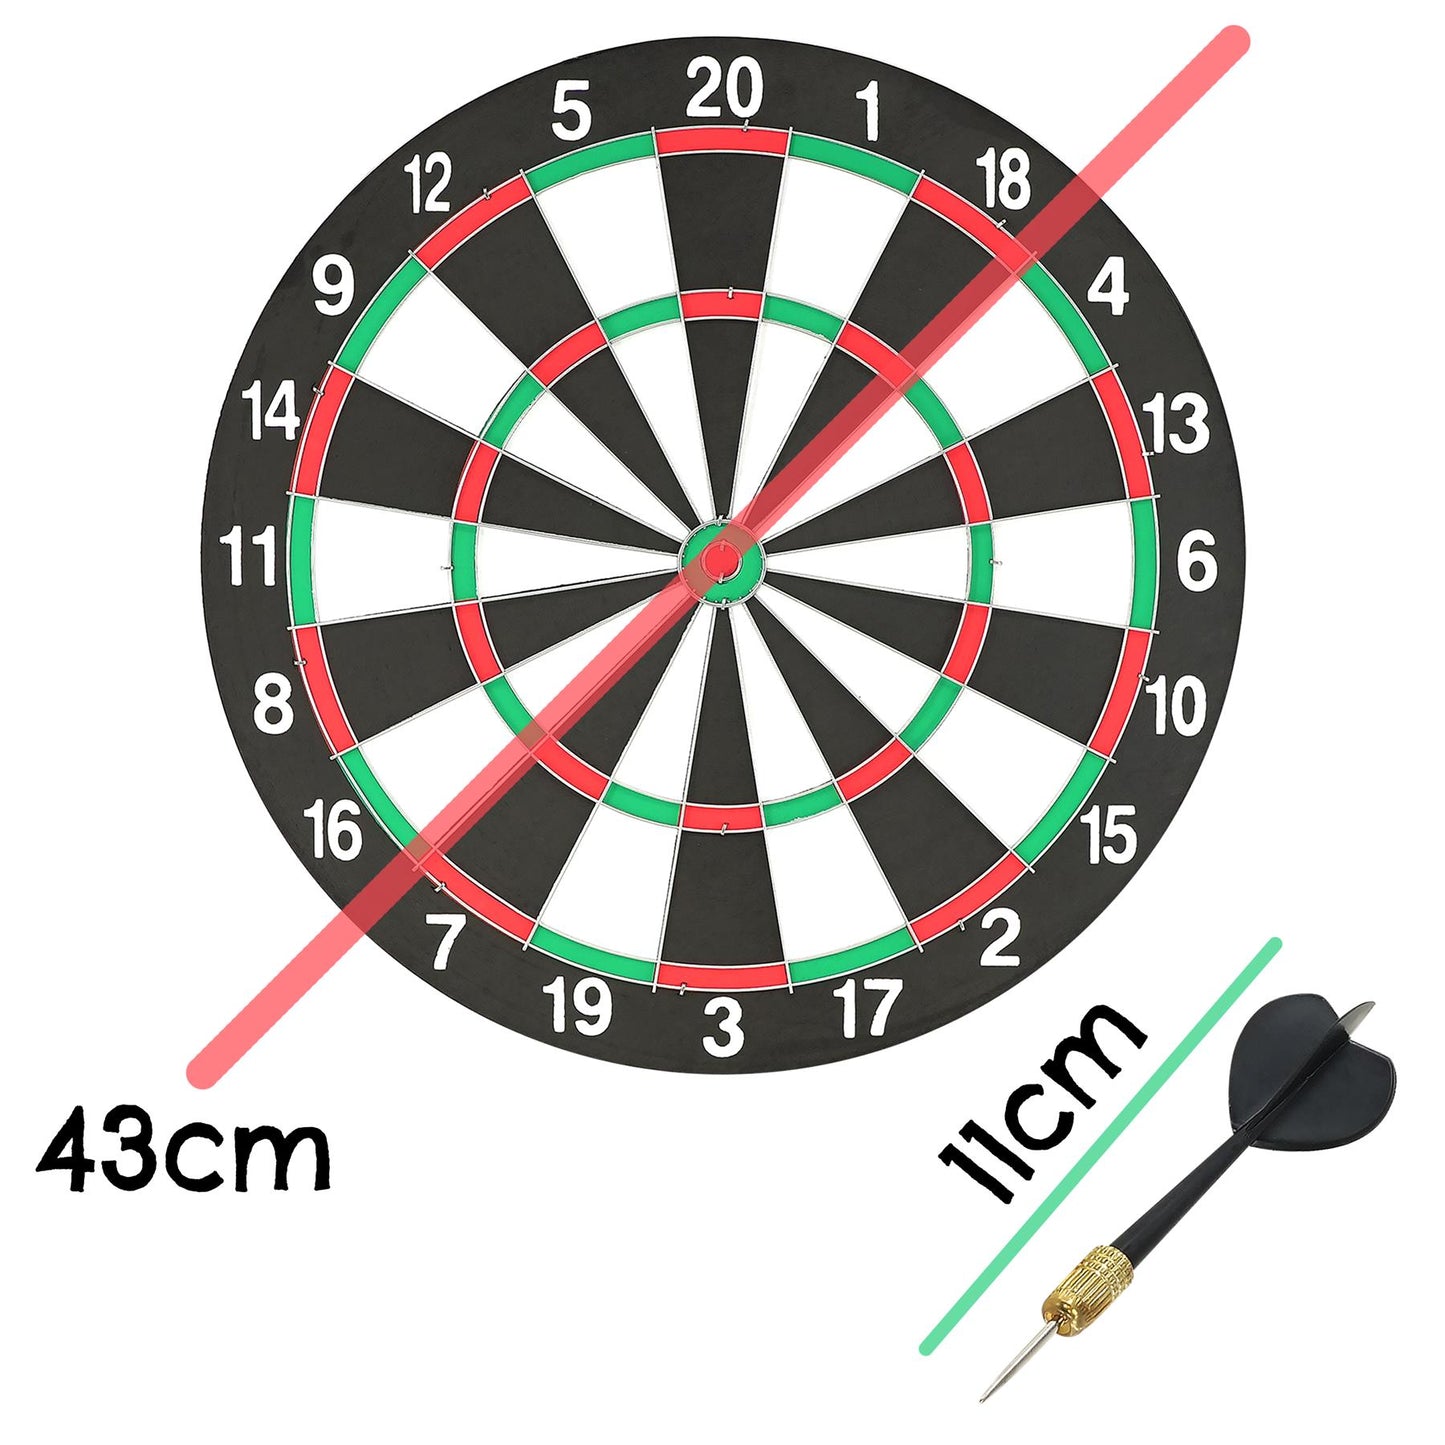 Double-Sided Dartboard with 6 Darts by The Magic Toy Shop - UKBuyZone